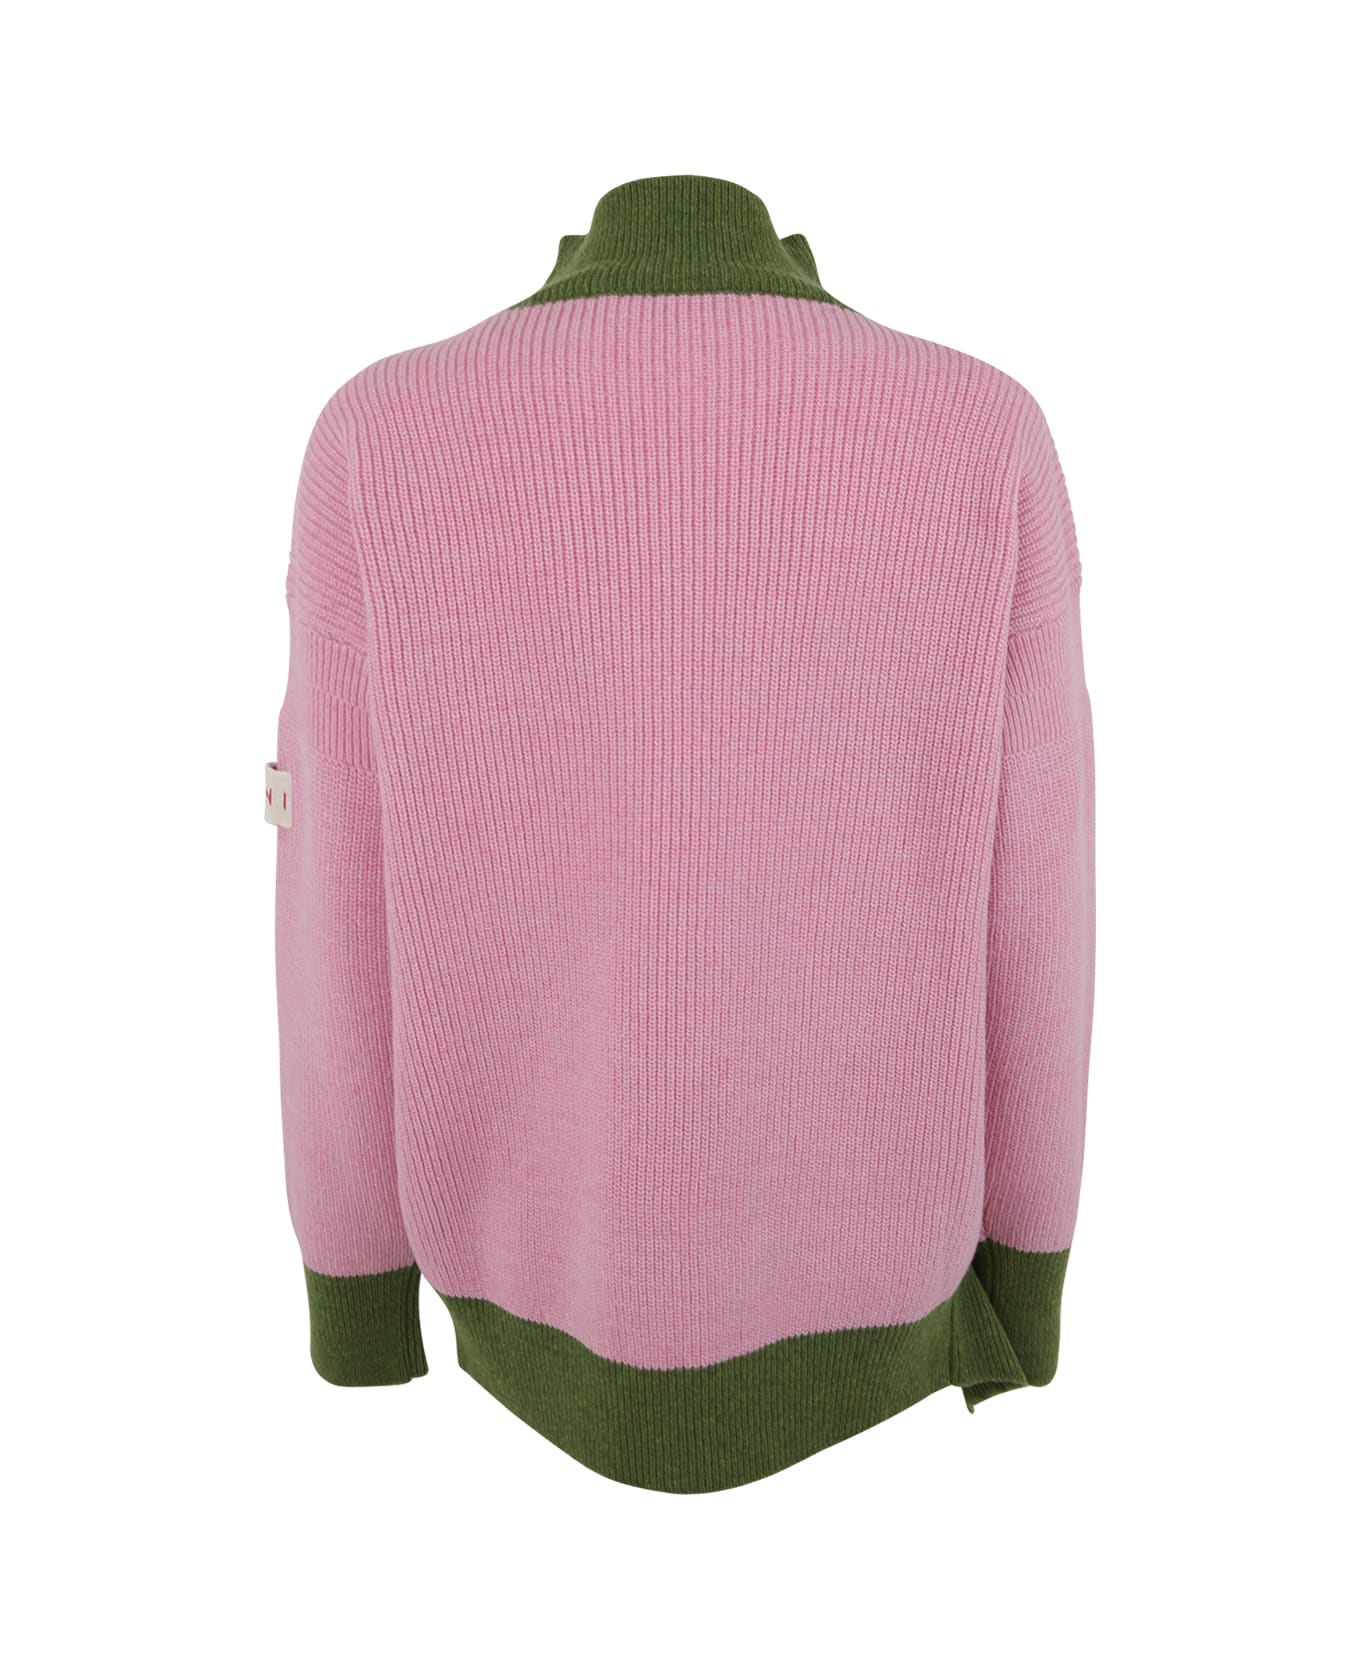 Marni Crew Neck Long Sleeves Loose Fit Sweater - Cinder Rose